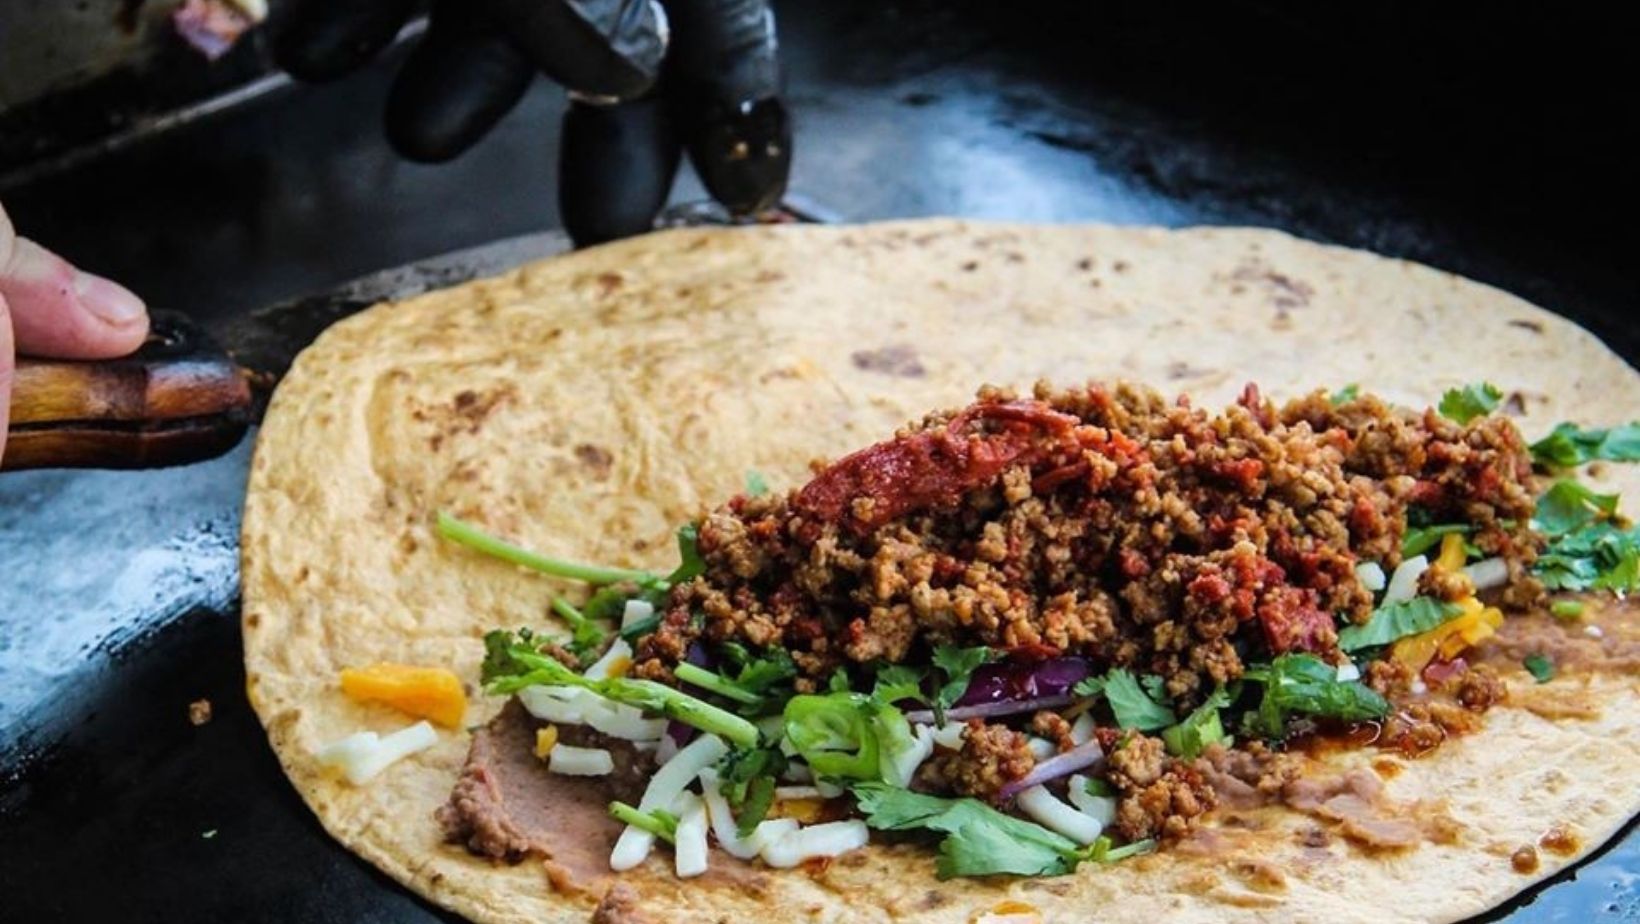 Who Has The Best Tacos In Prague? : Prague Morning